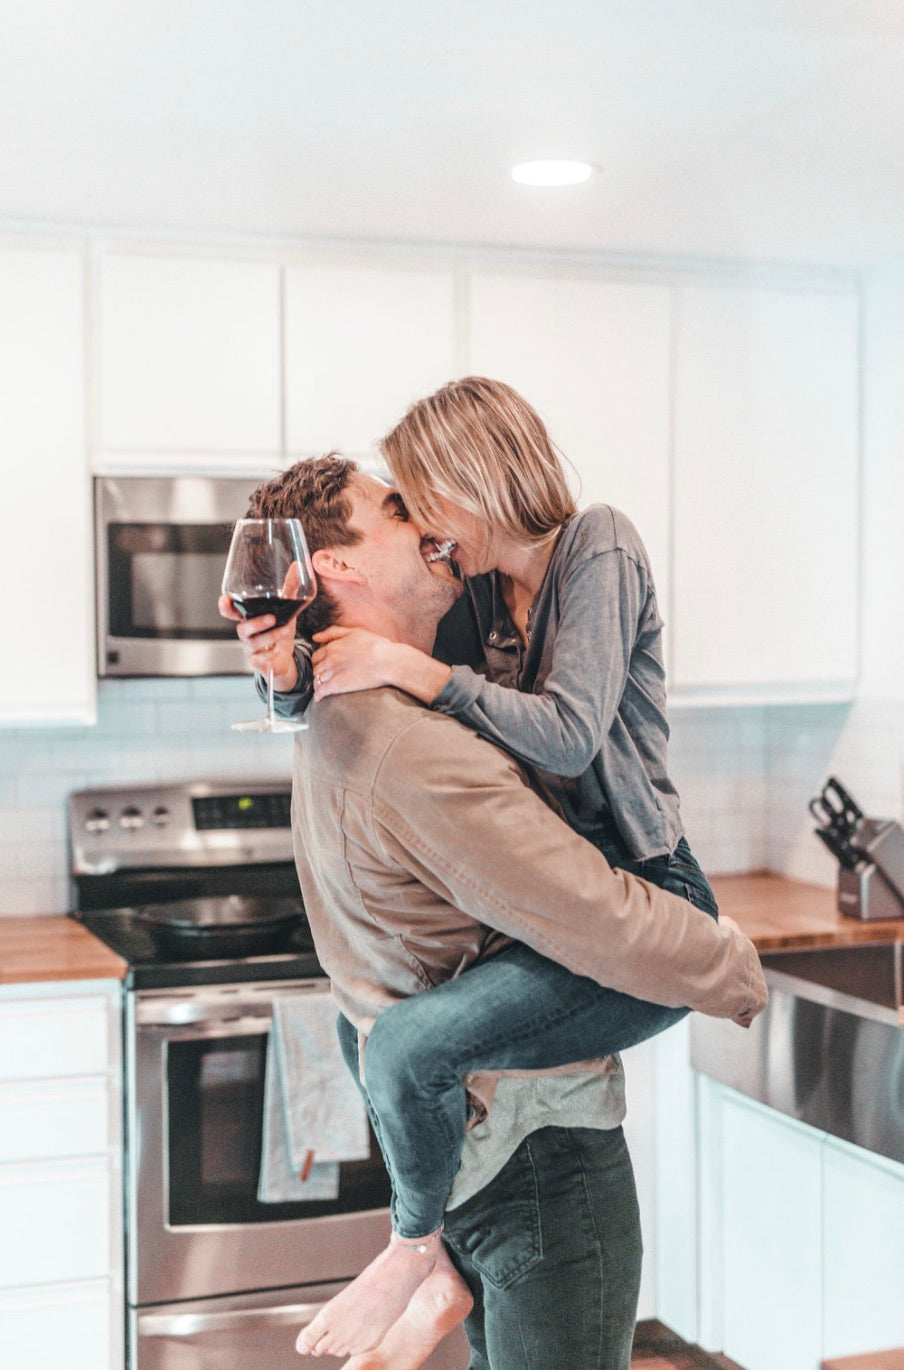 Husband carries wife who is carrying a glass of wine as they both smile in their kitchen